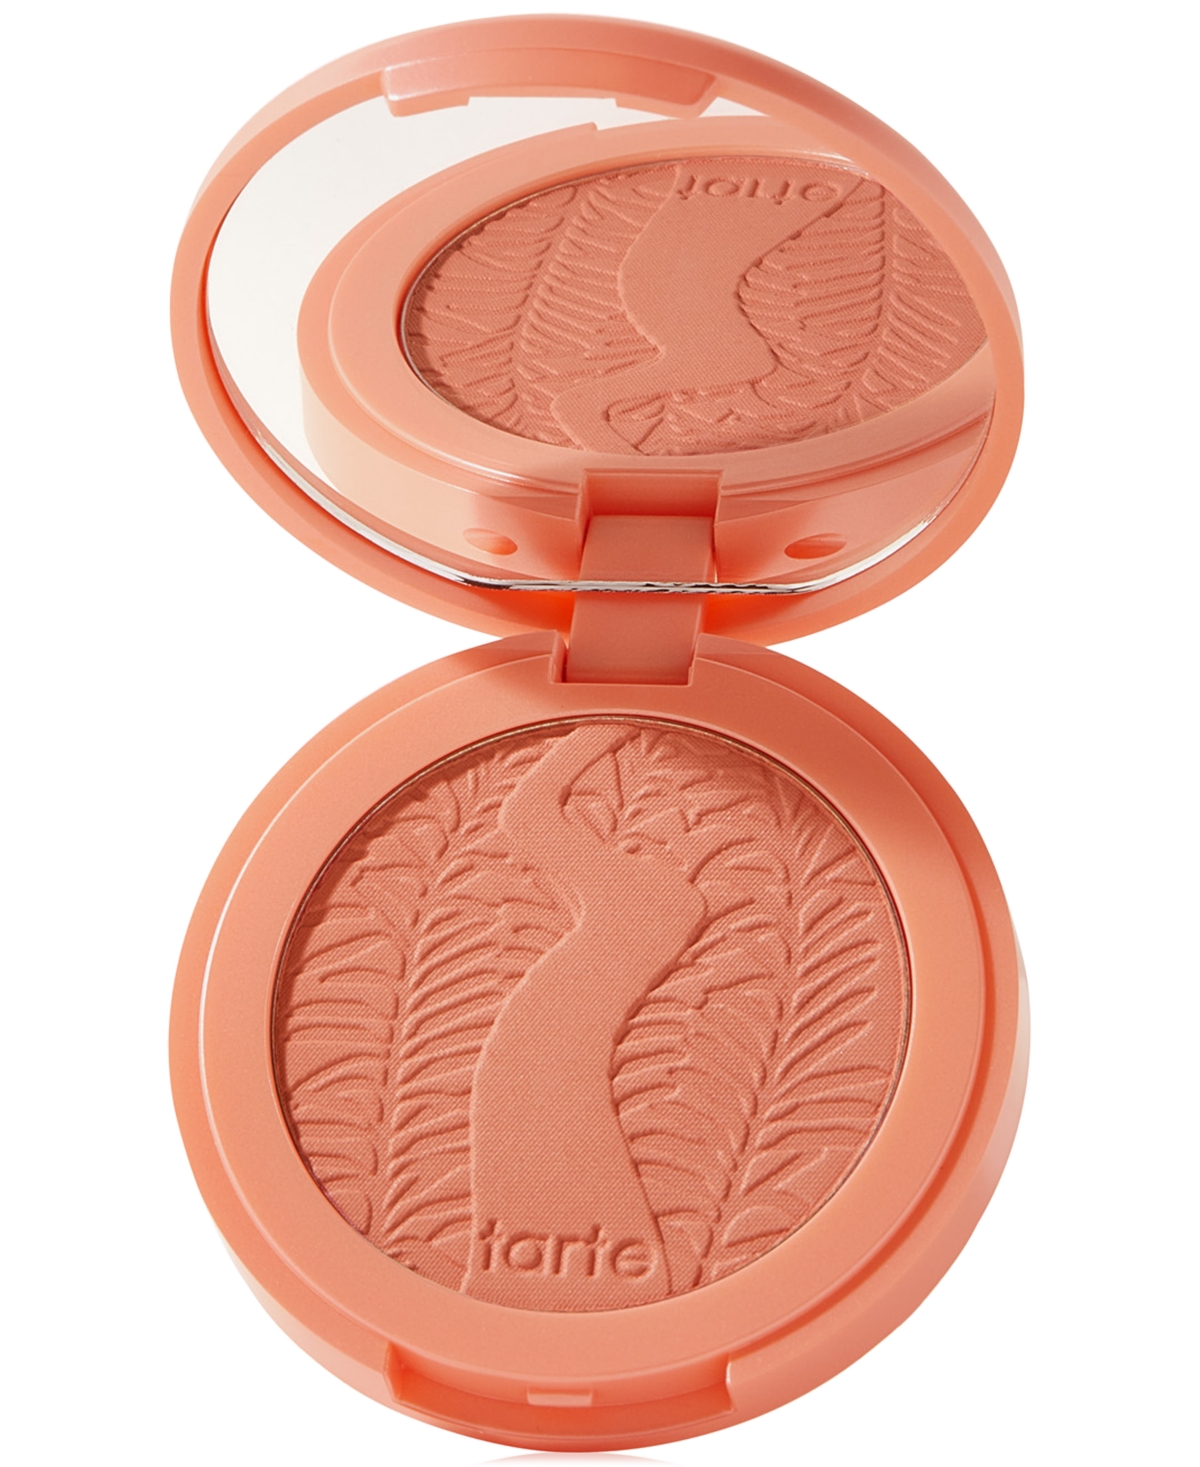 Amazonian Clay 12-Hour Blush - Confident